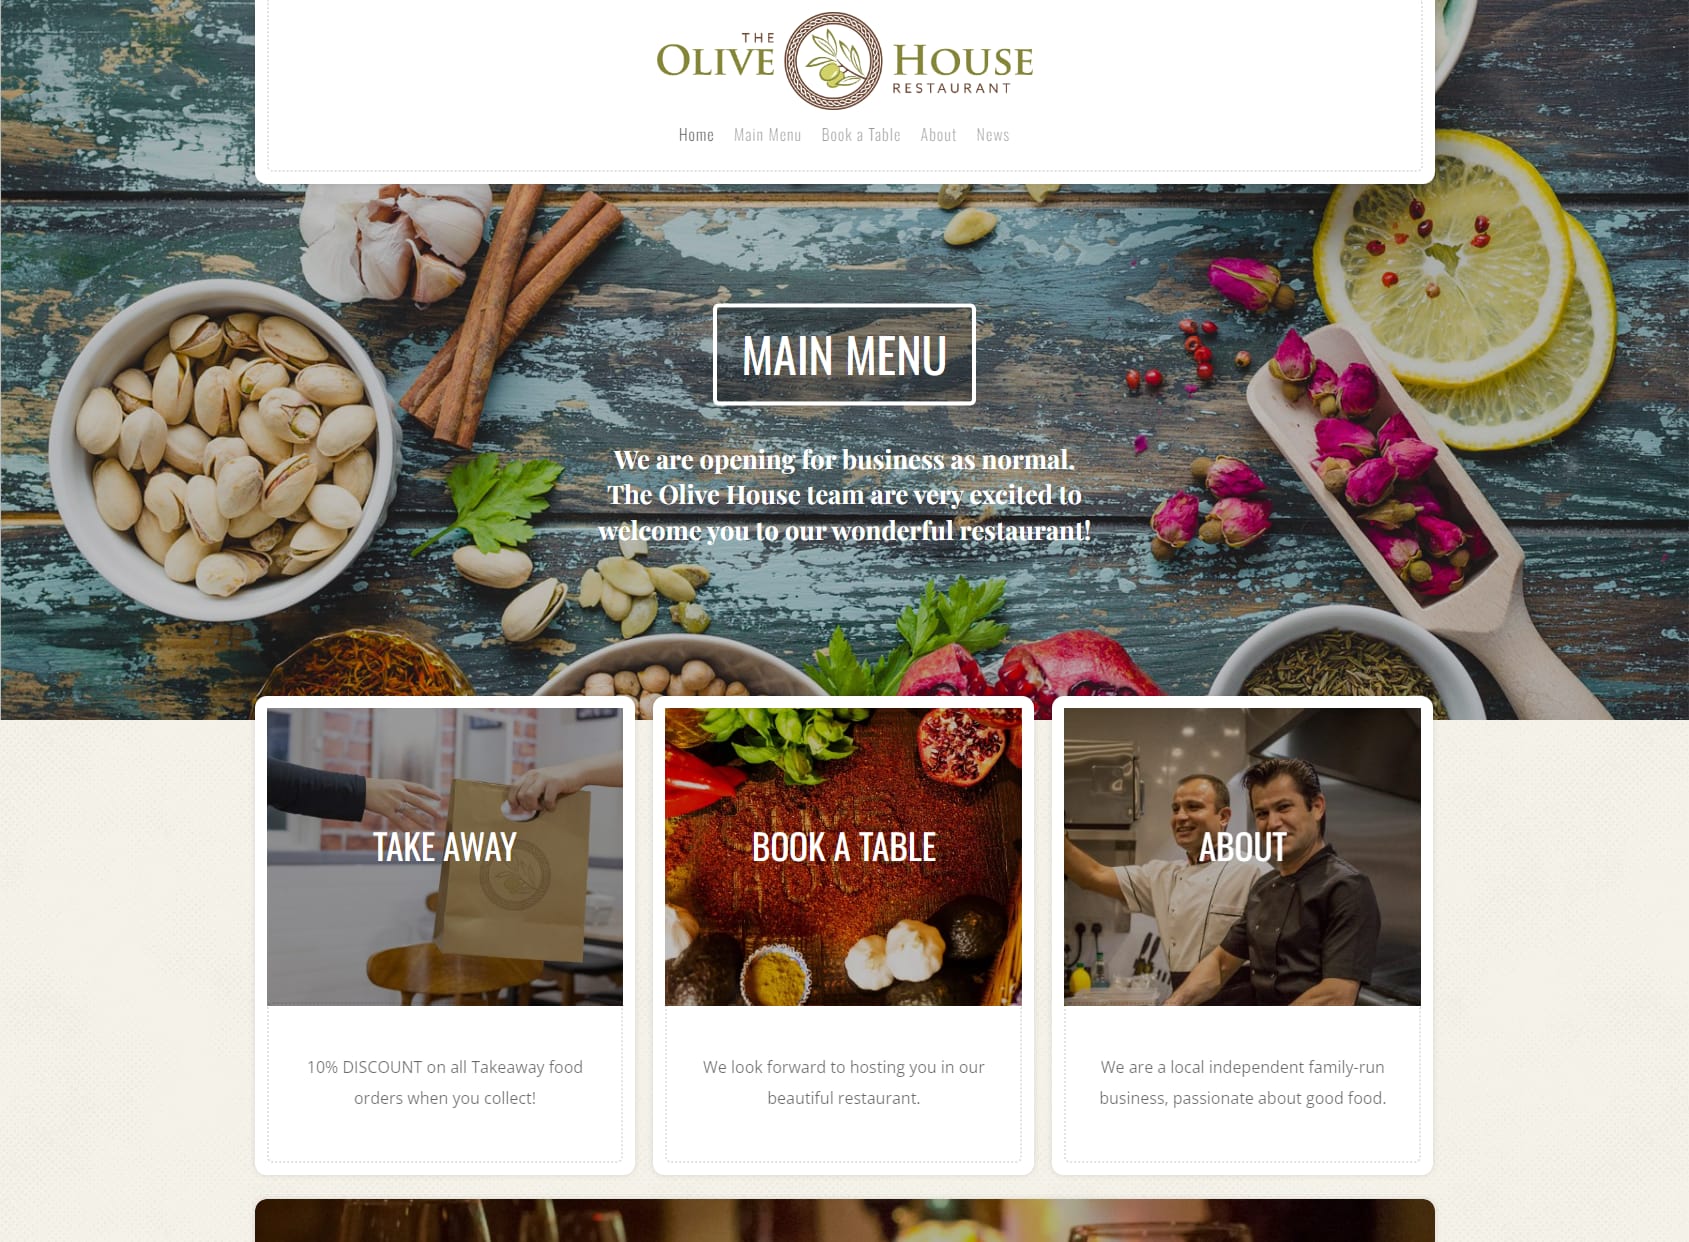 The Olive House